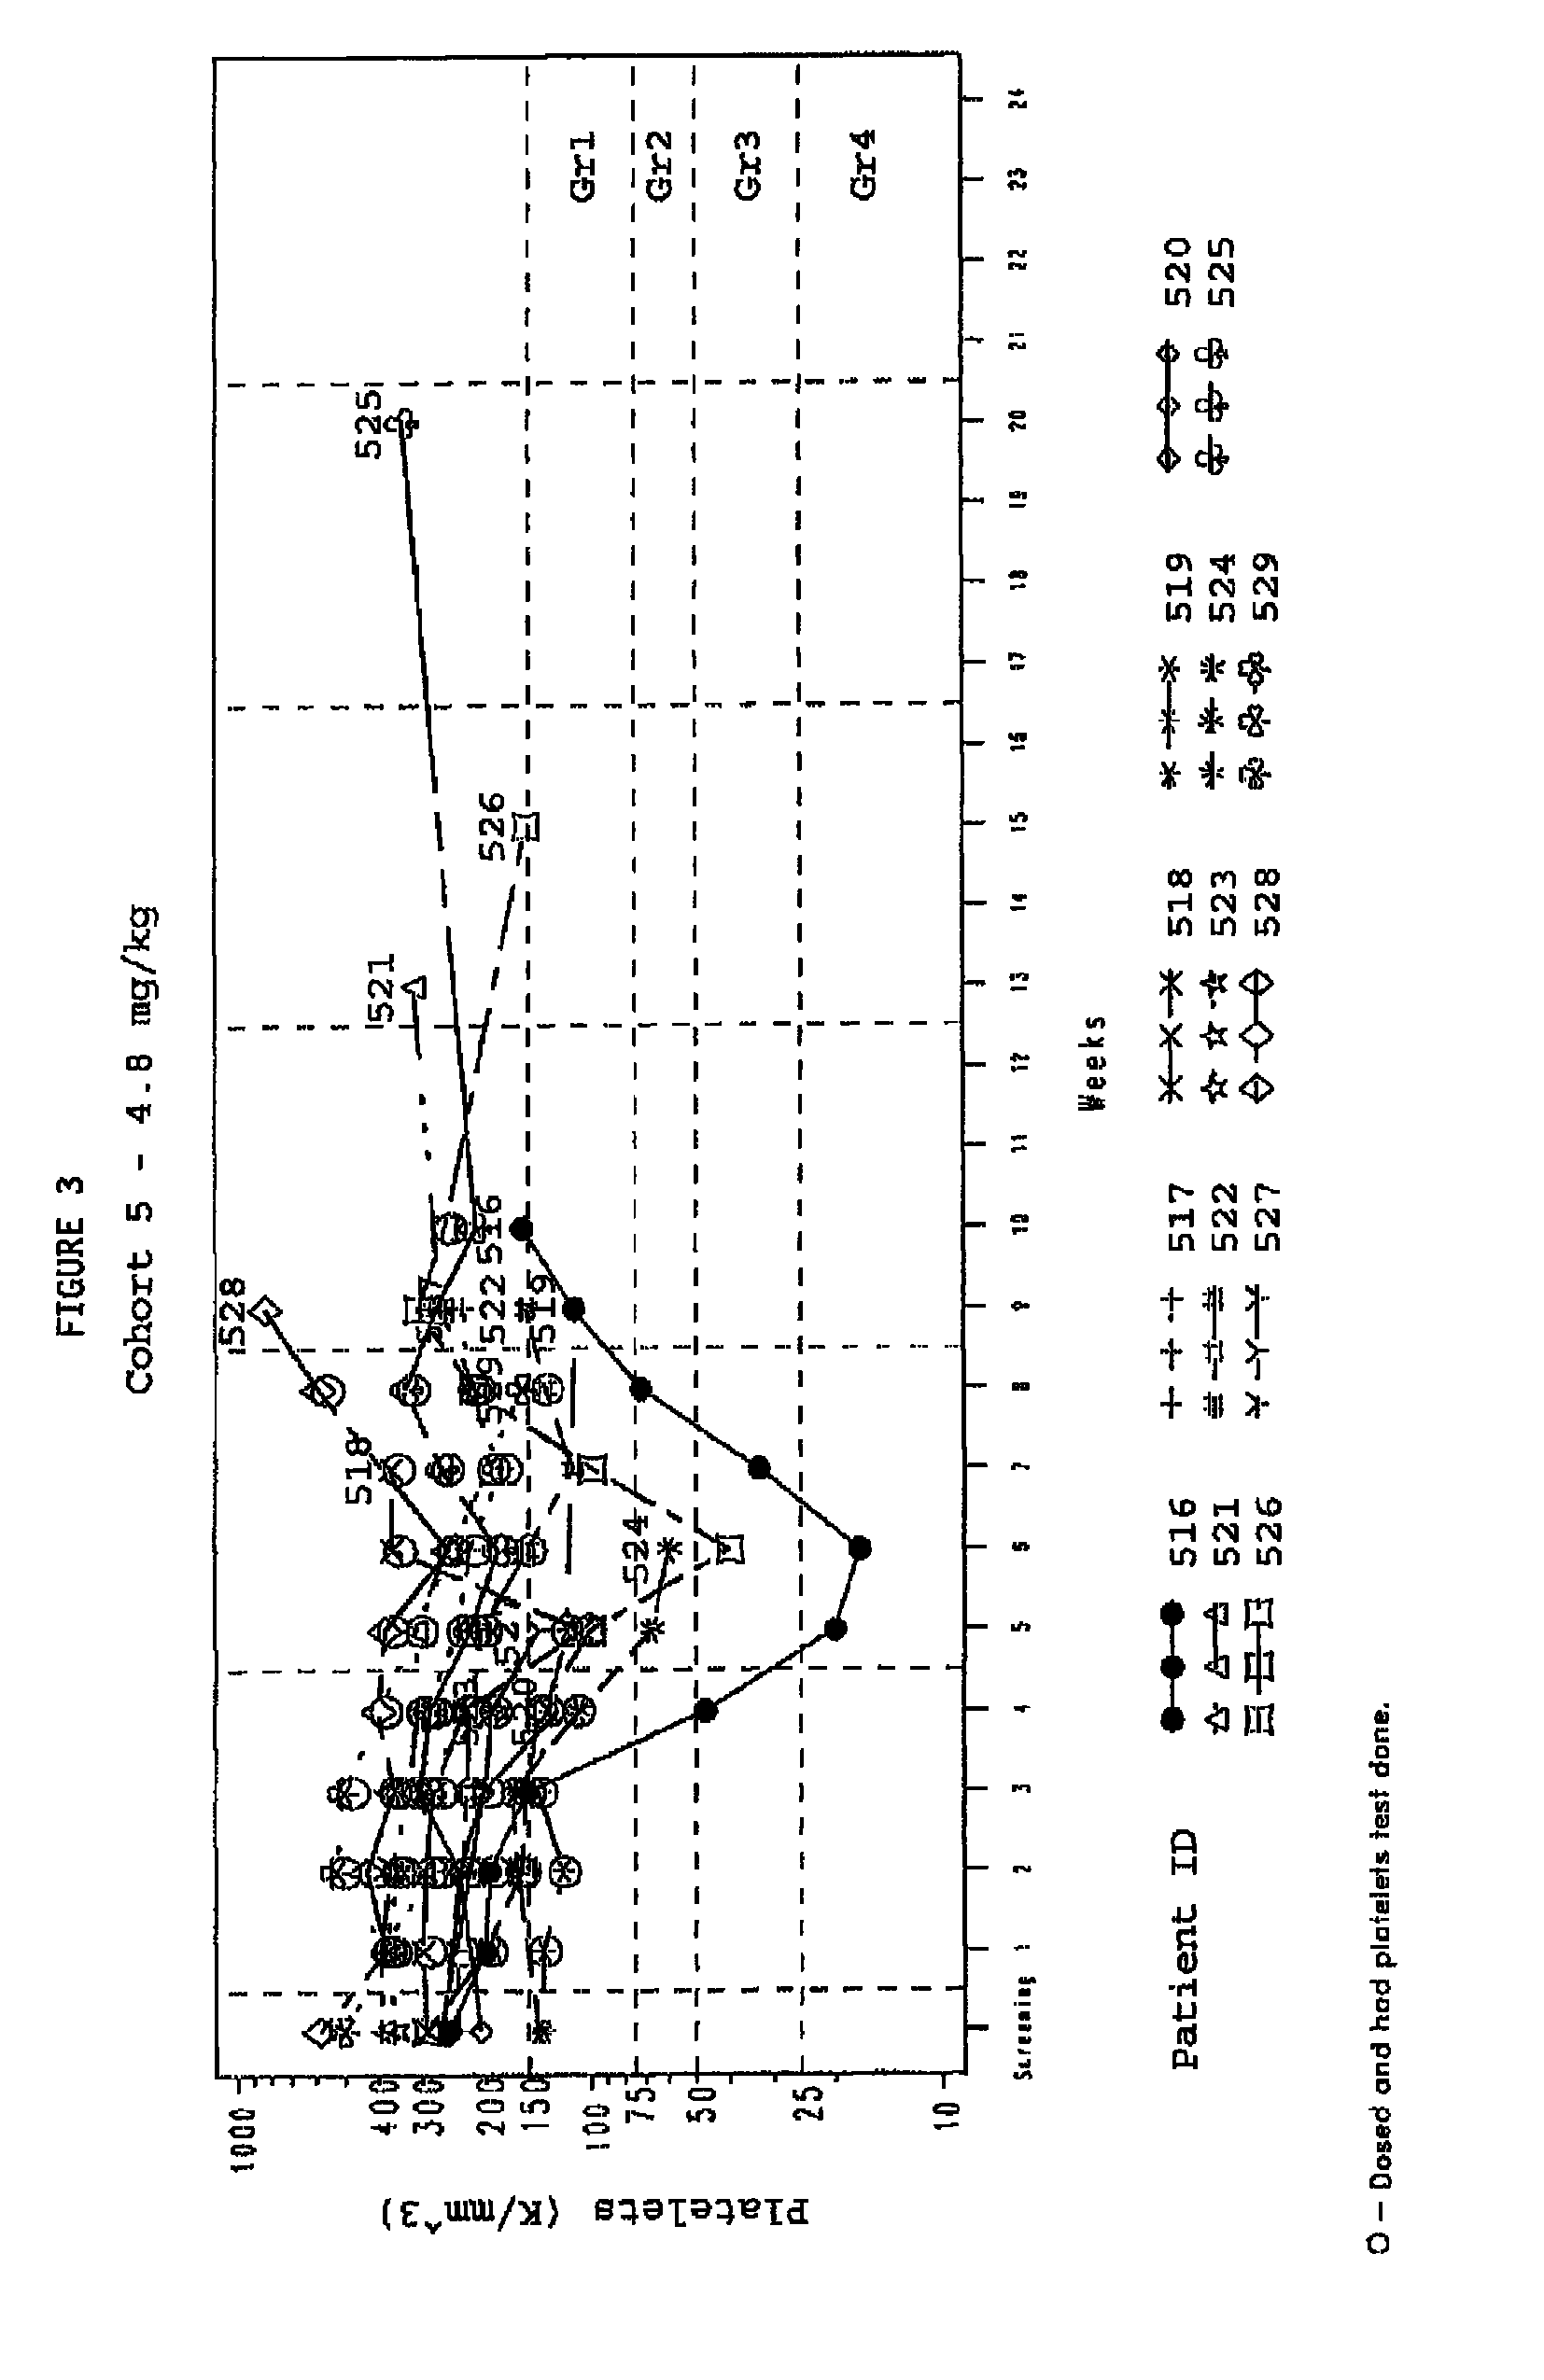 Method for identification of sensitivity of a patient to telomerase inhibition therapy